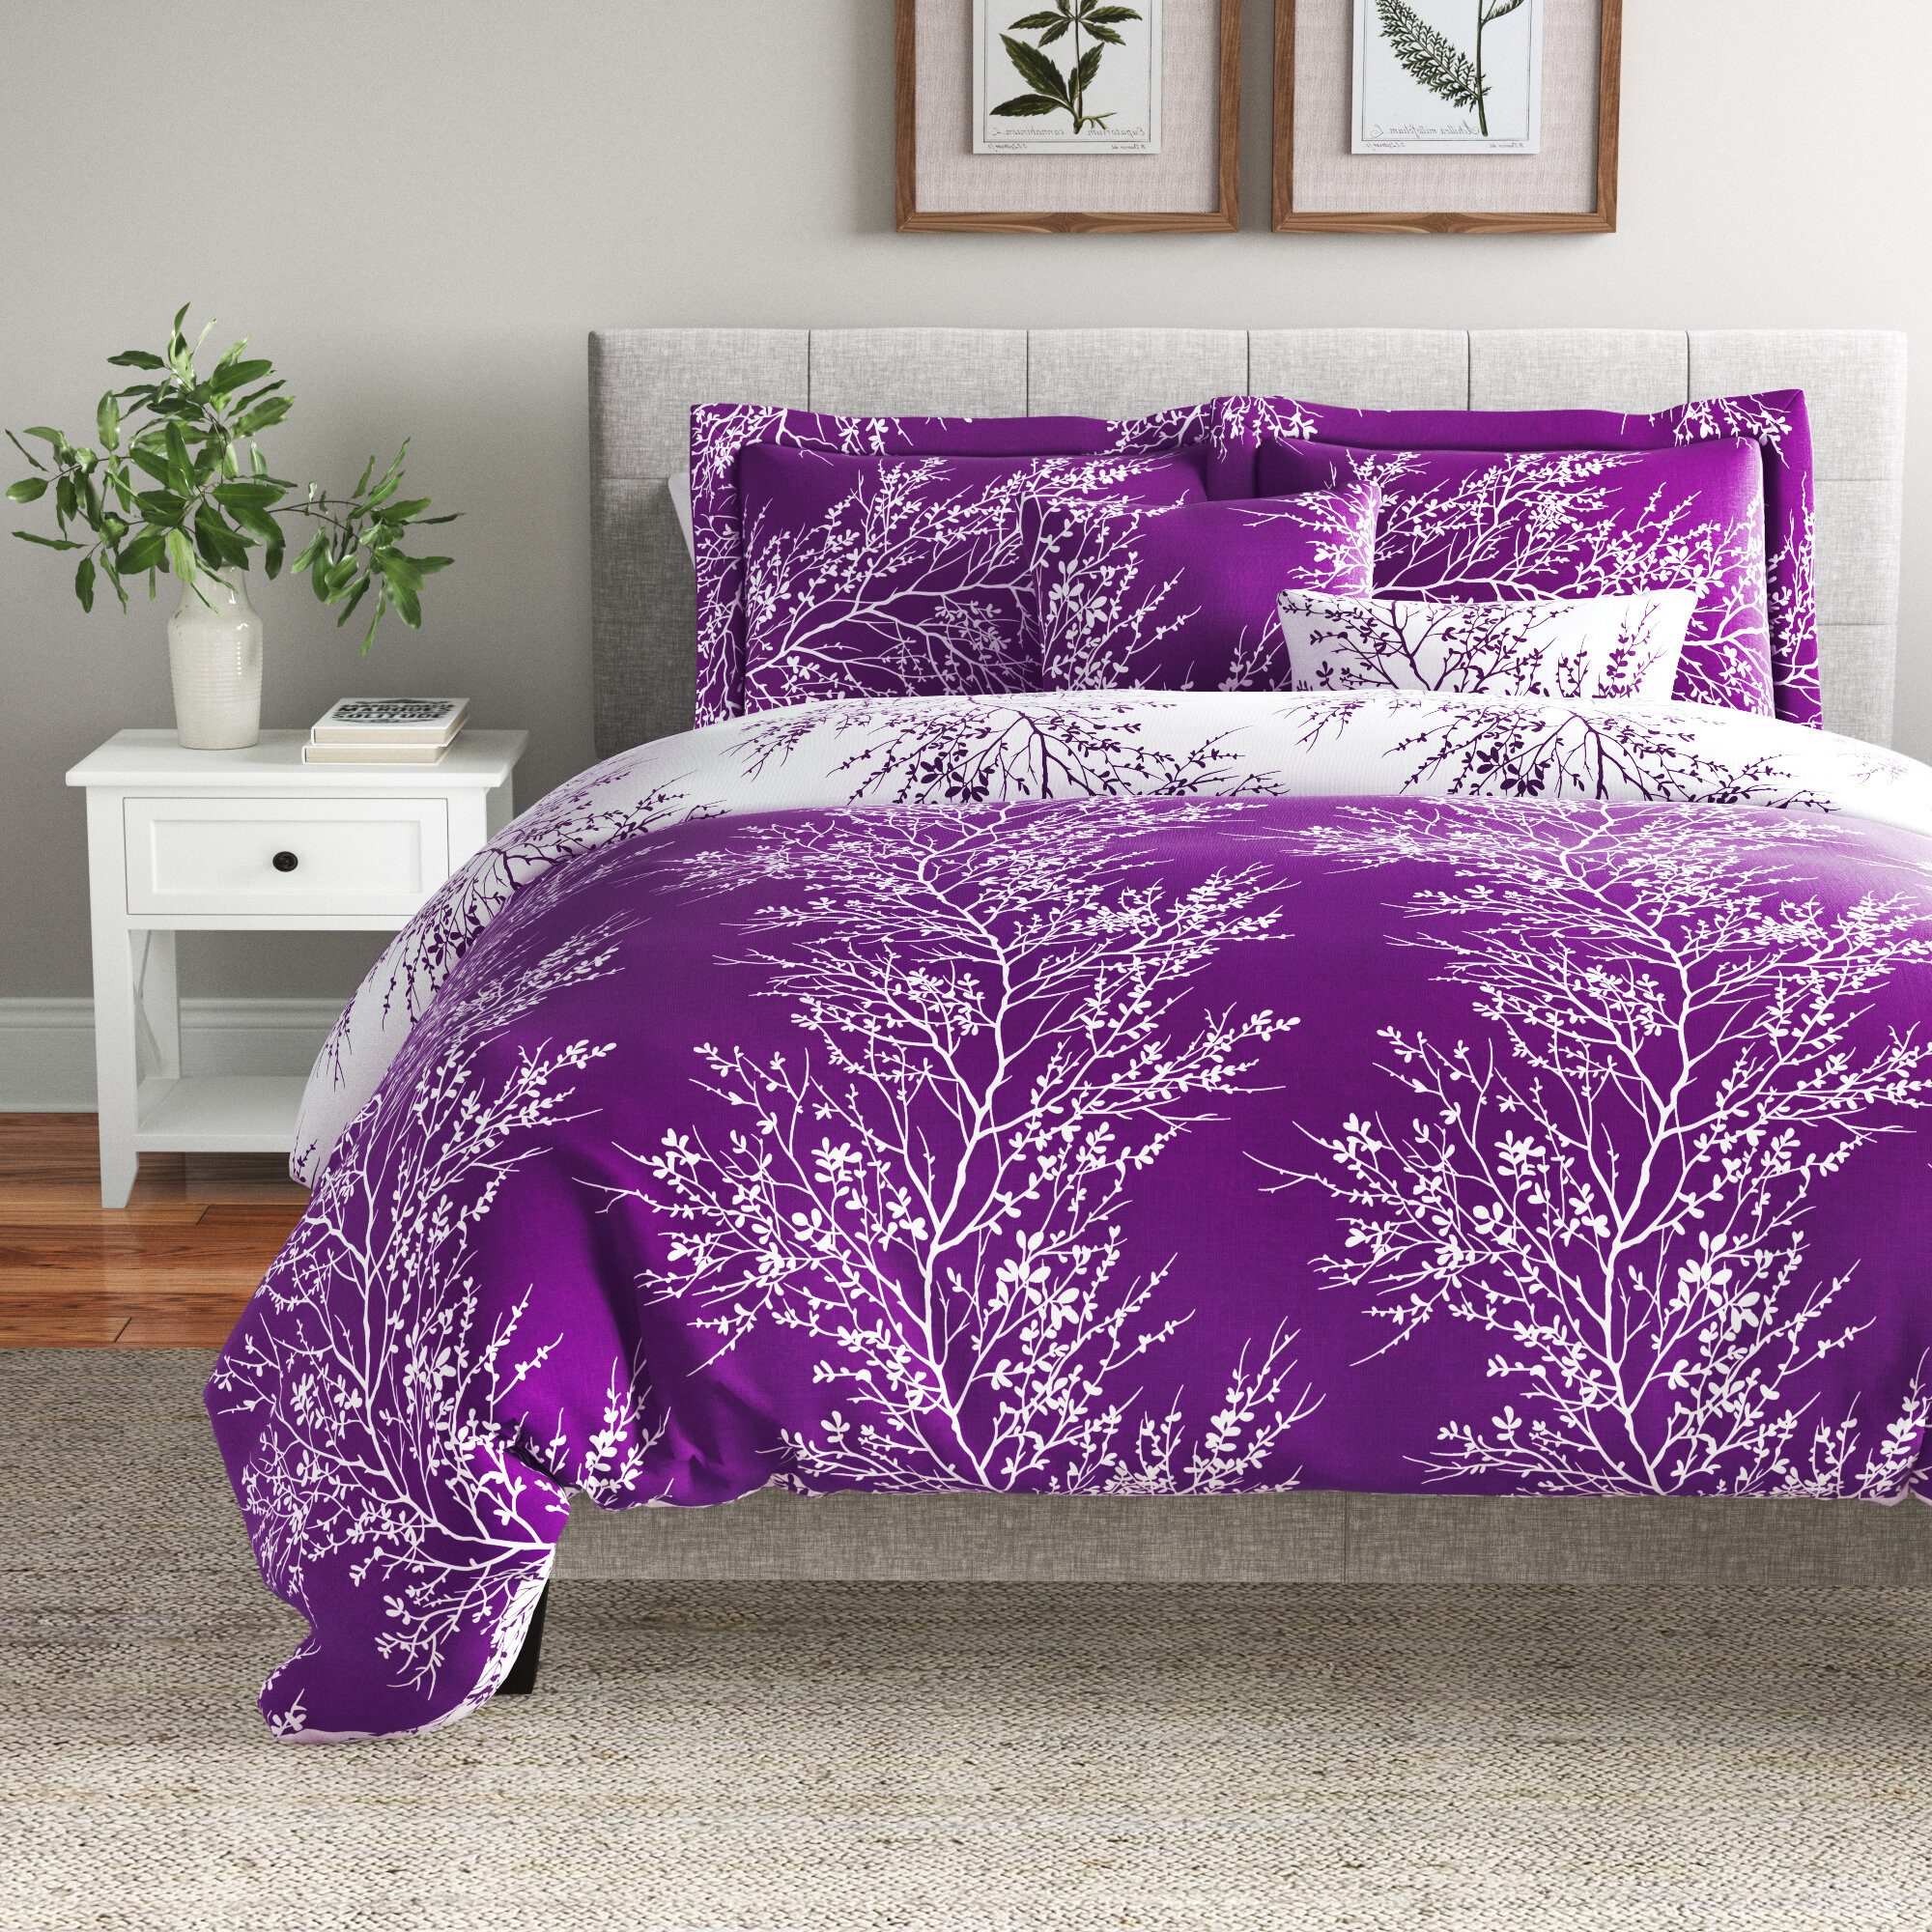 Tessella Laces Embroidery Style Duvet Covers Bedding Sets /Bed Spread /C Covers 